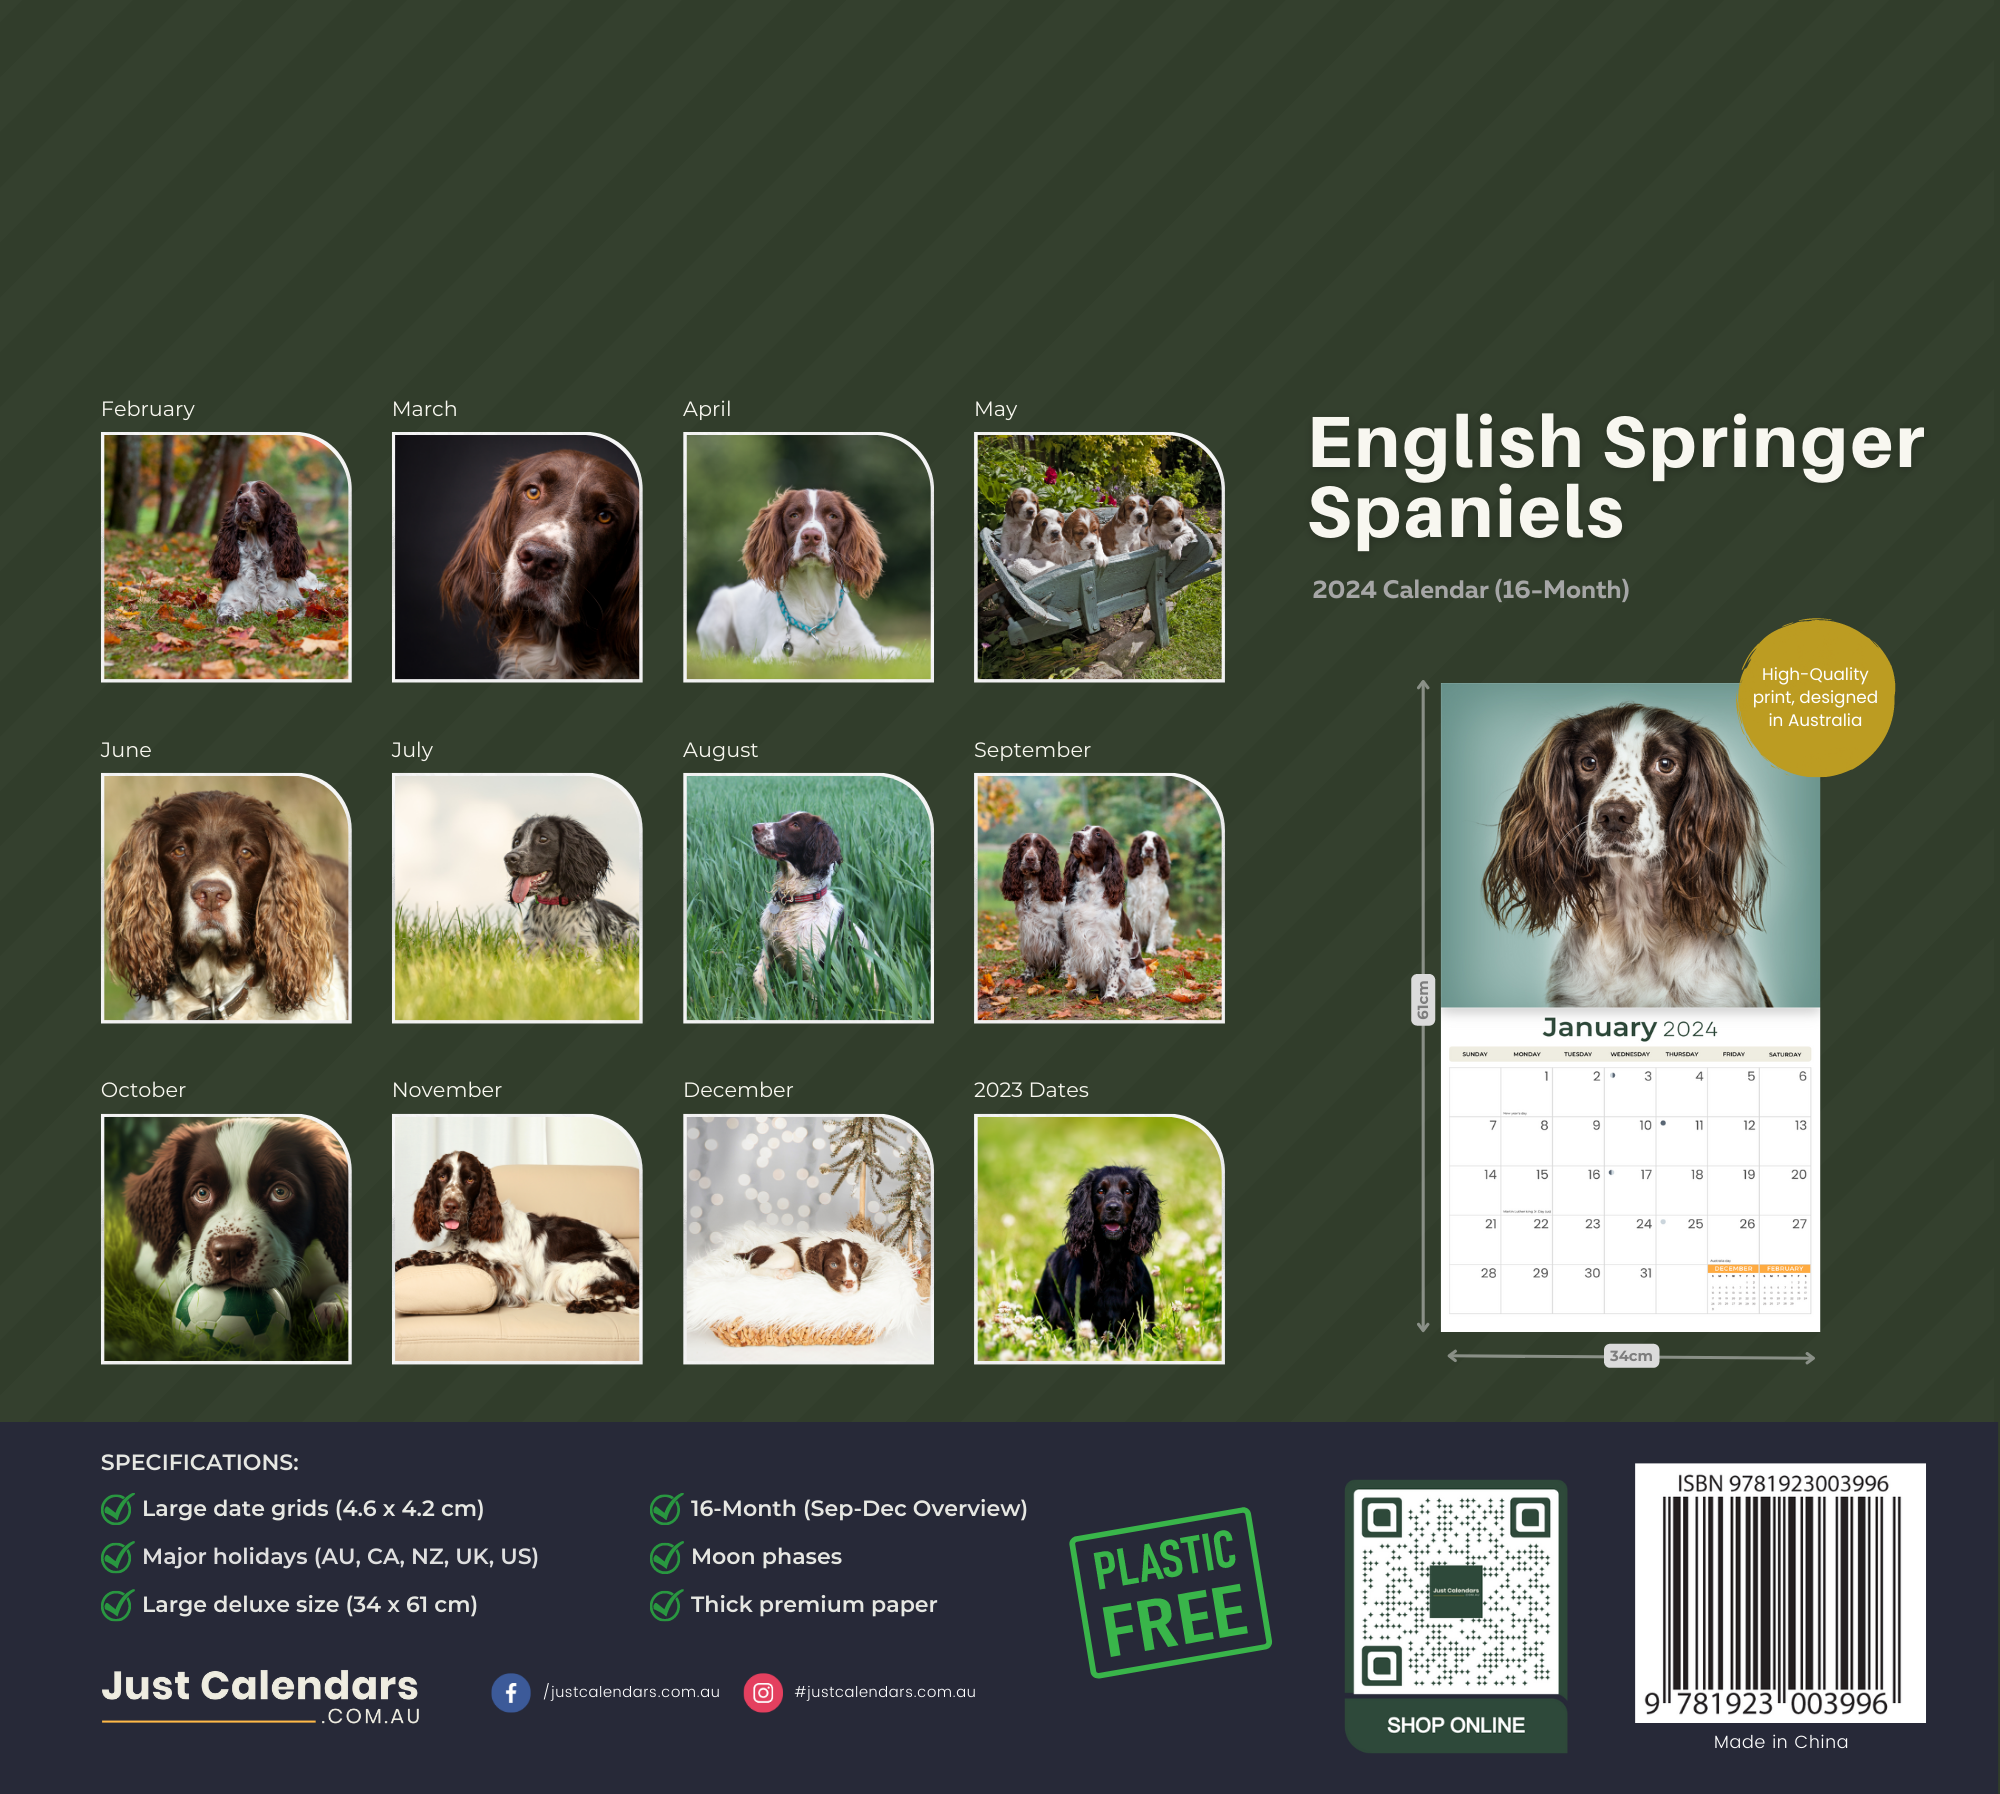 2024 English Springer Spaniels Dogs & Puppies - Deluxe Wall Calendar by Just Calendars - 16 Month - Plastic Free